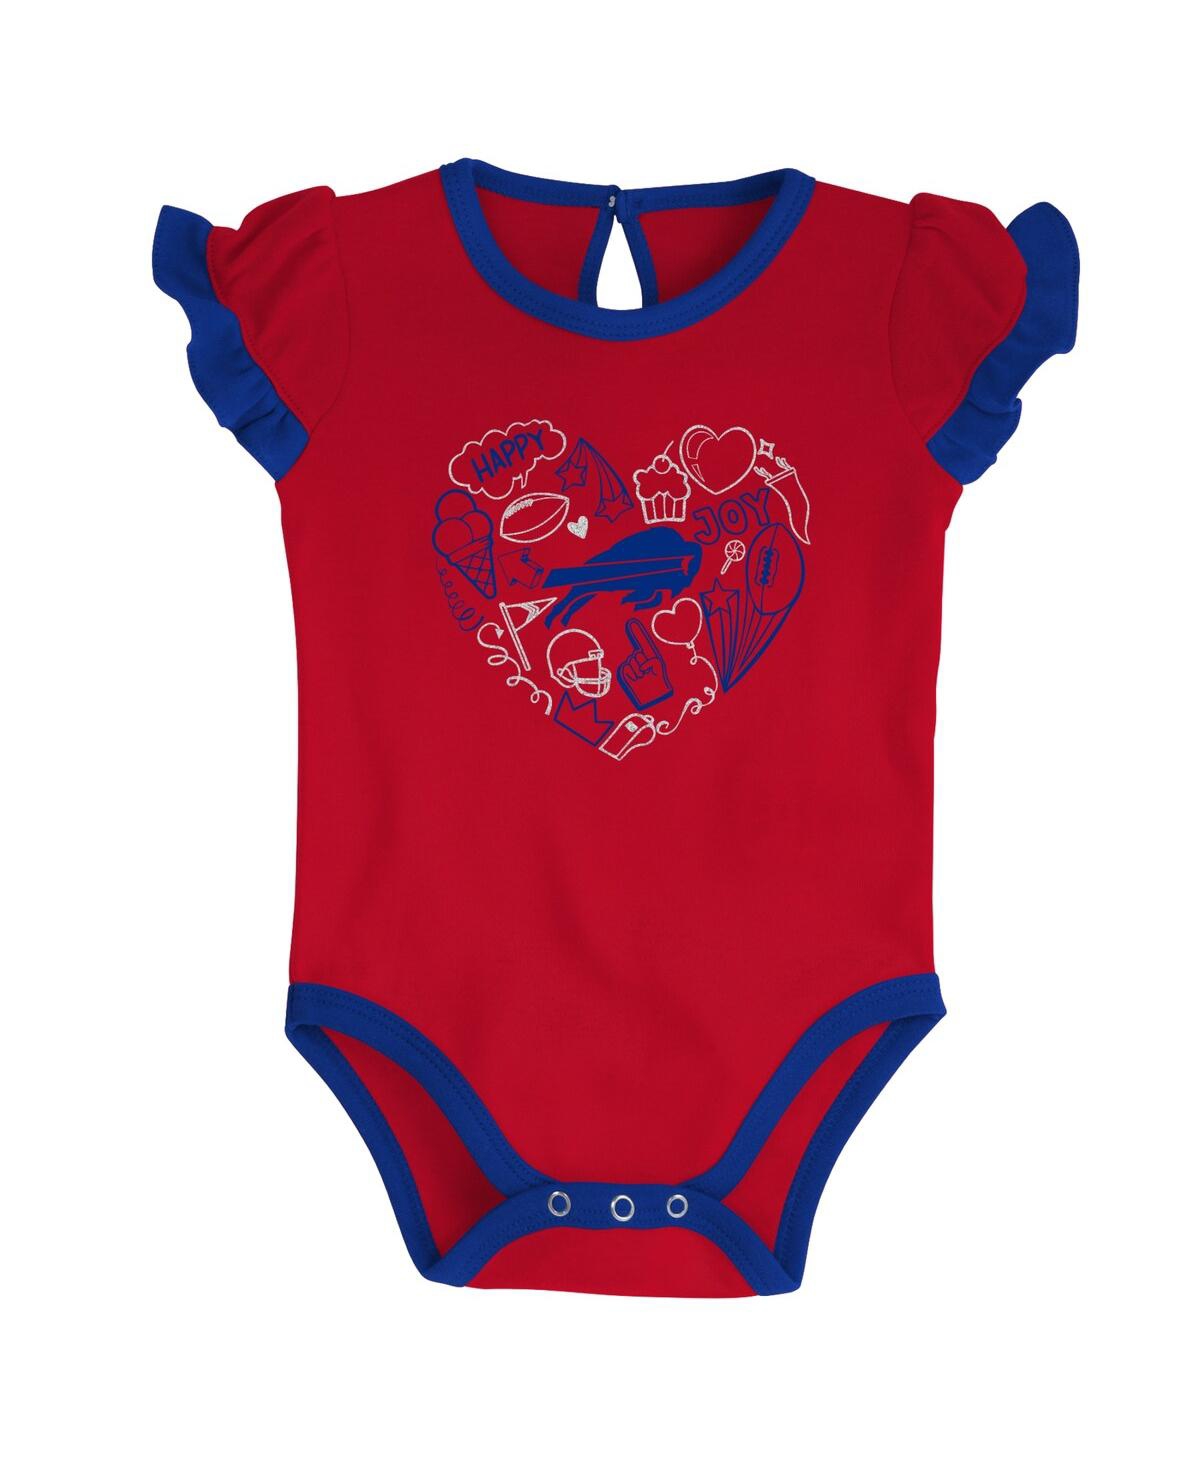 Shop Outerstuff Newborn And Infant Boys And Girls Royal, Red Buffalo Bills Too Much Love Two-piece Bodysuit Set In Royal,red